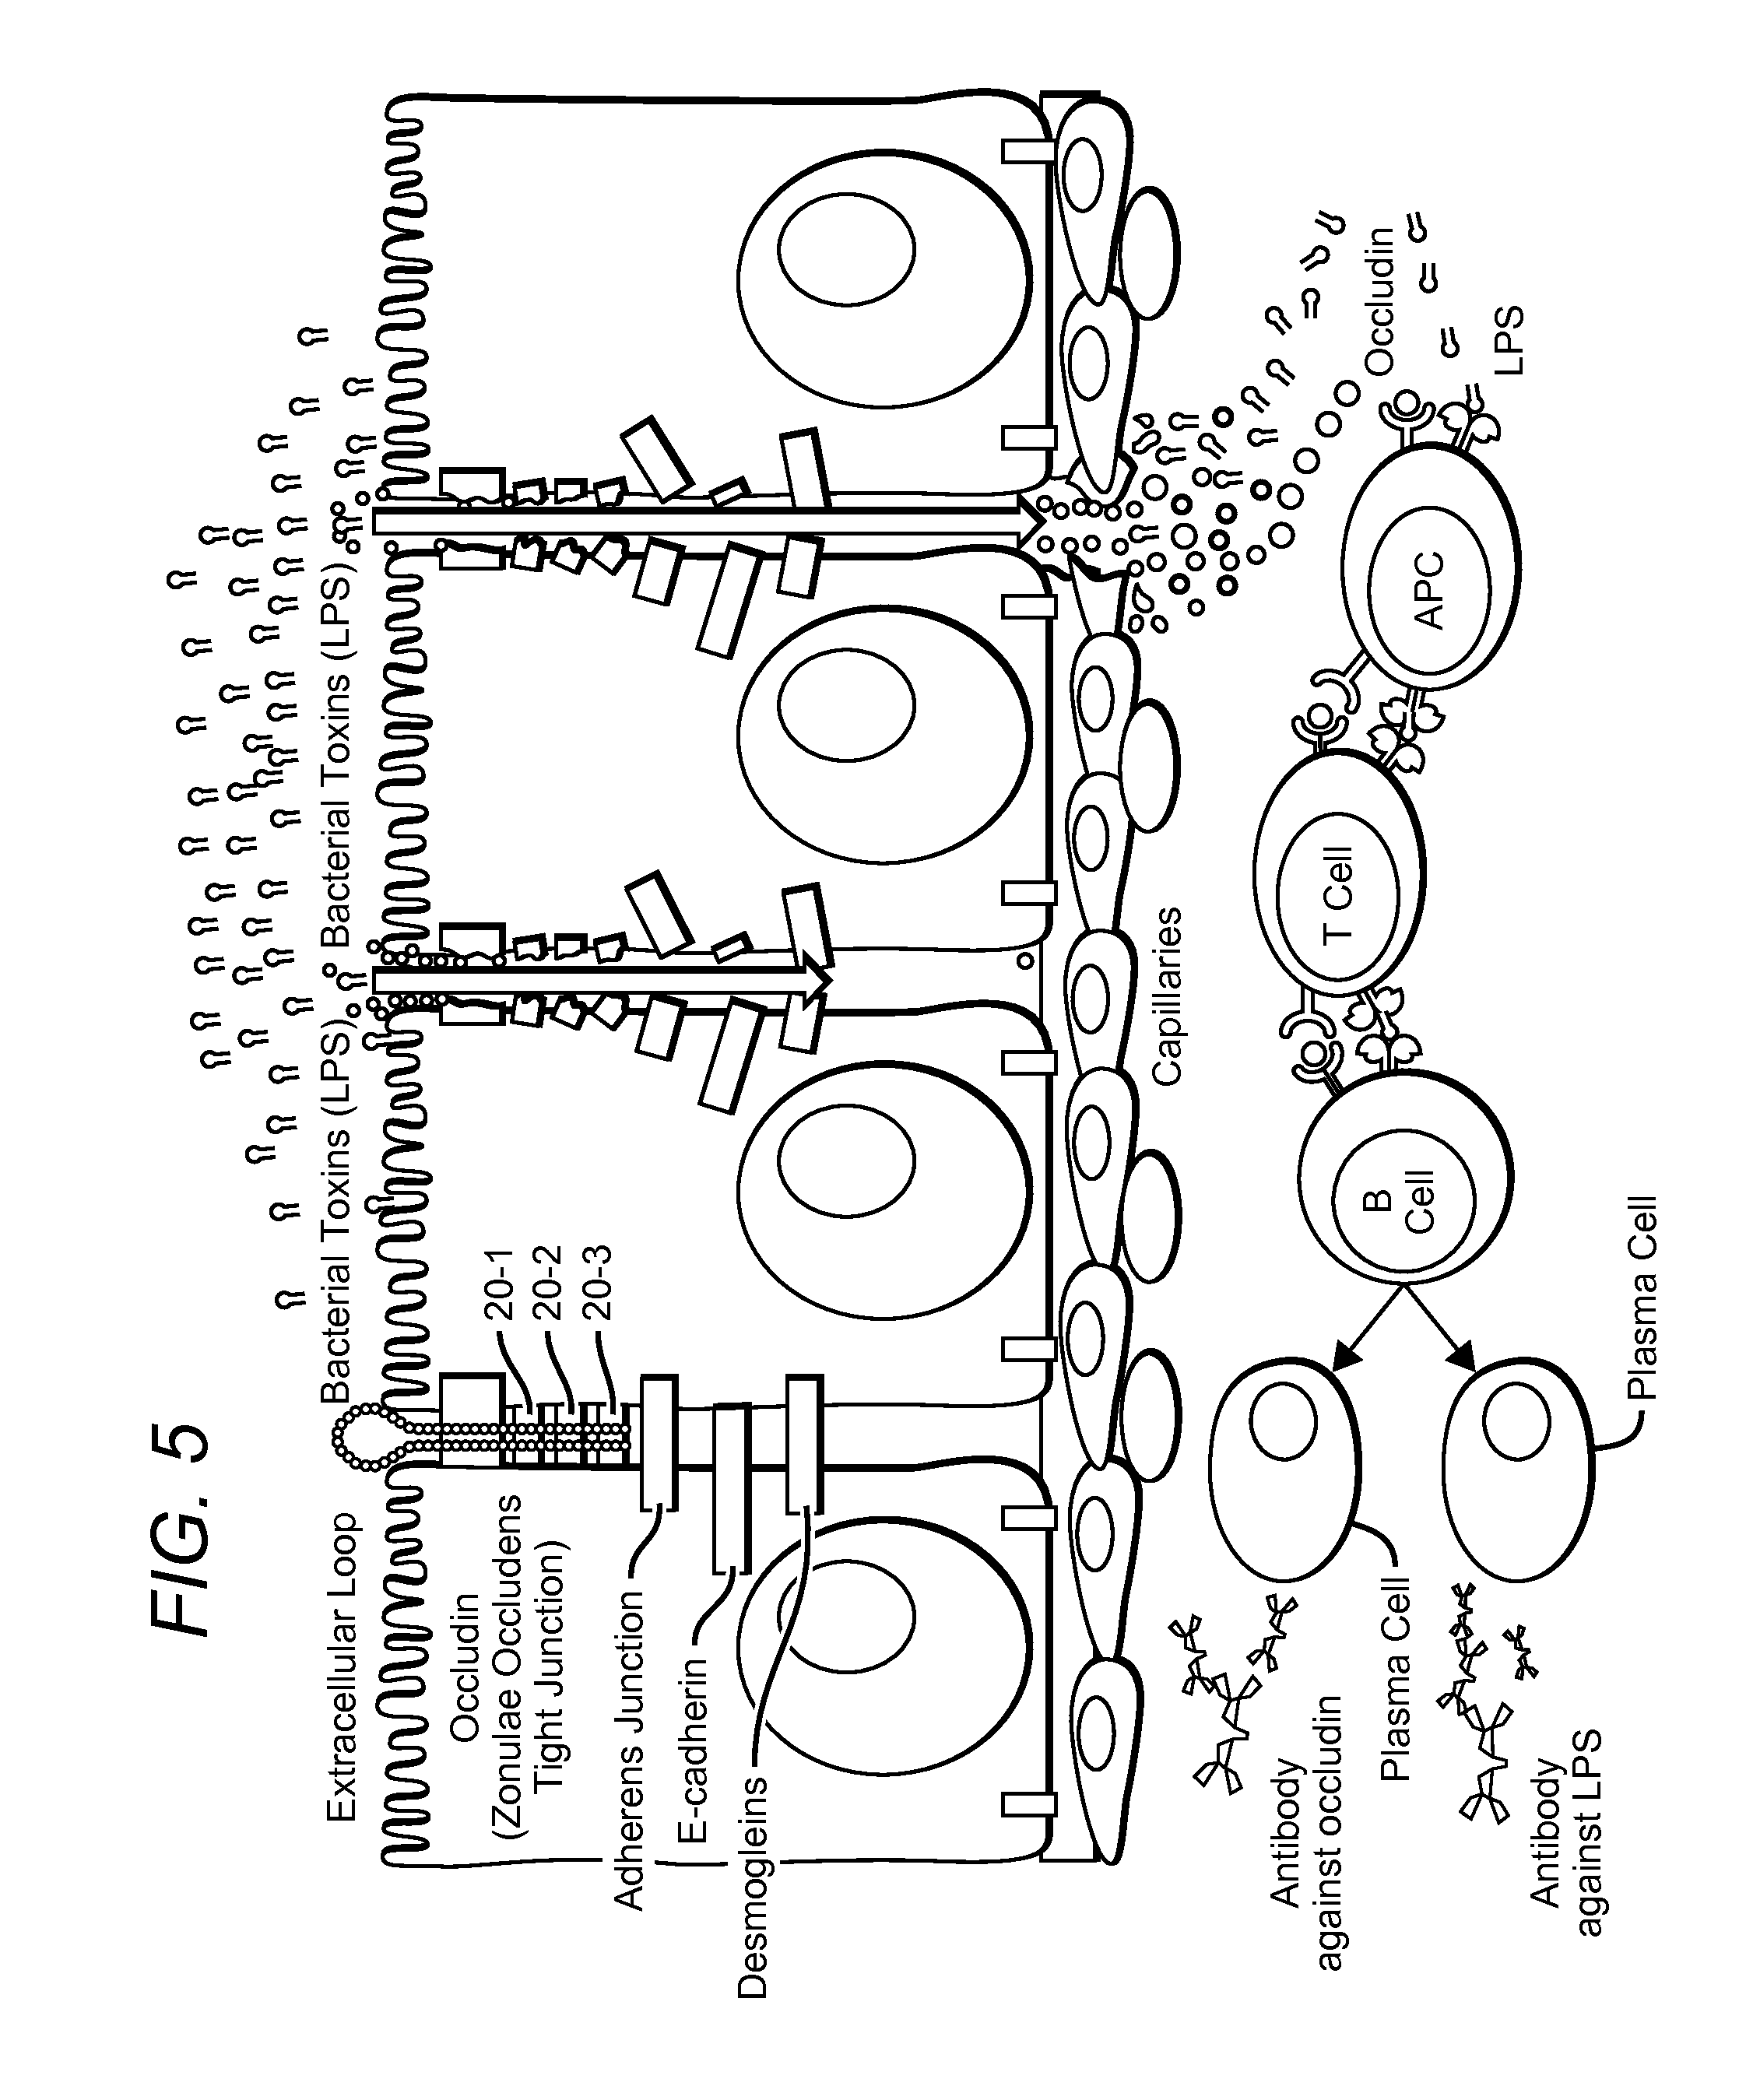 Method for detection of intestinal, and blood-brain barrier permeability and testing materials thereto